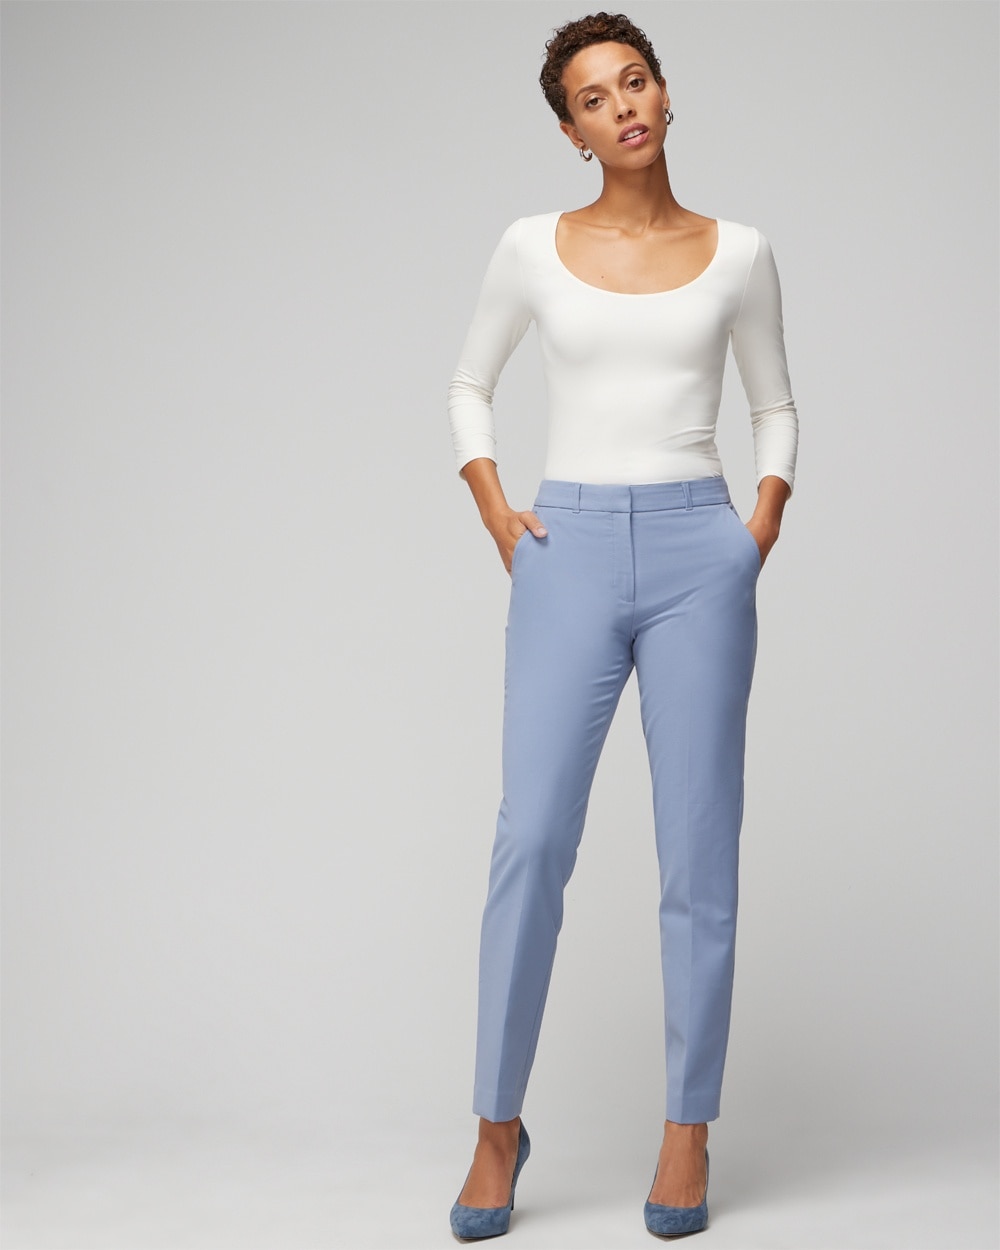 WHBM\u00AE Elle Slim Ankle Comfort Stretch Pant video preview image, click to start video